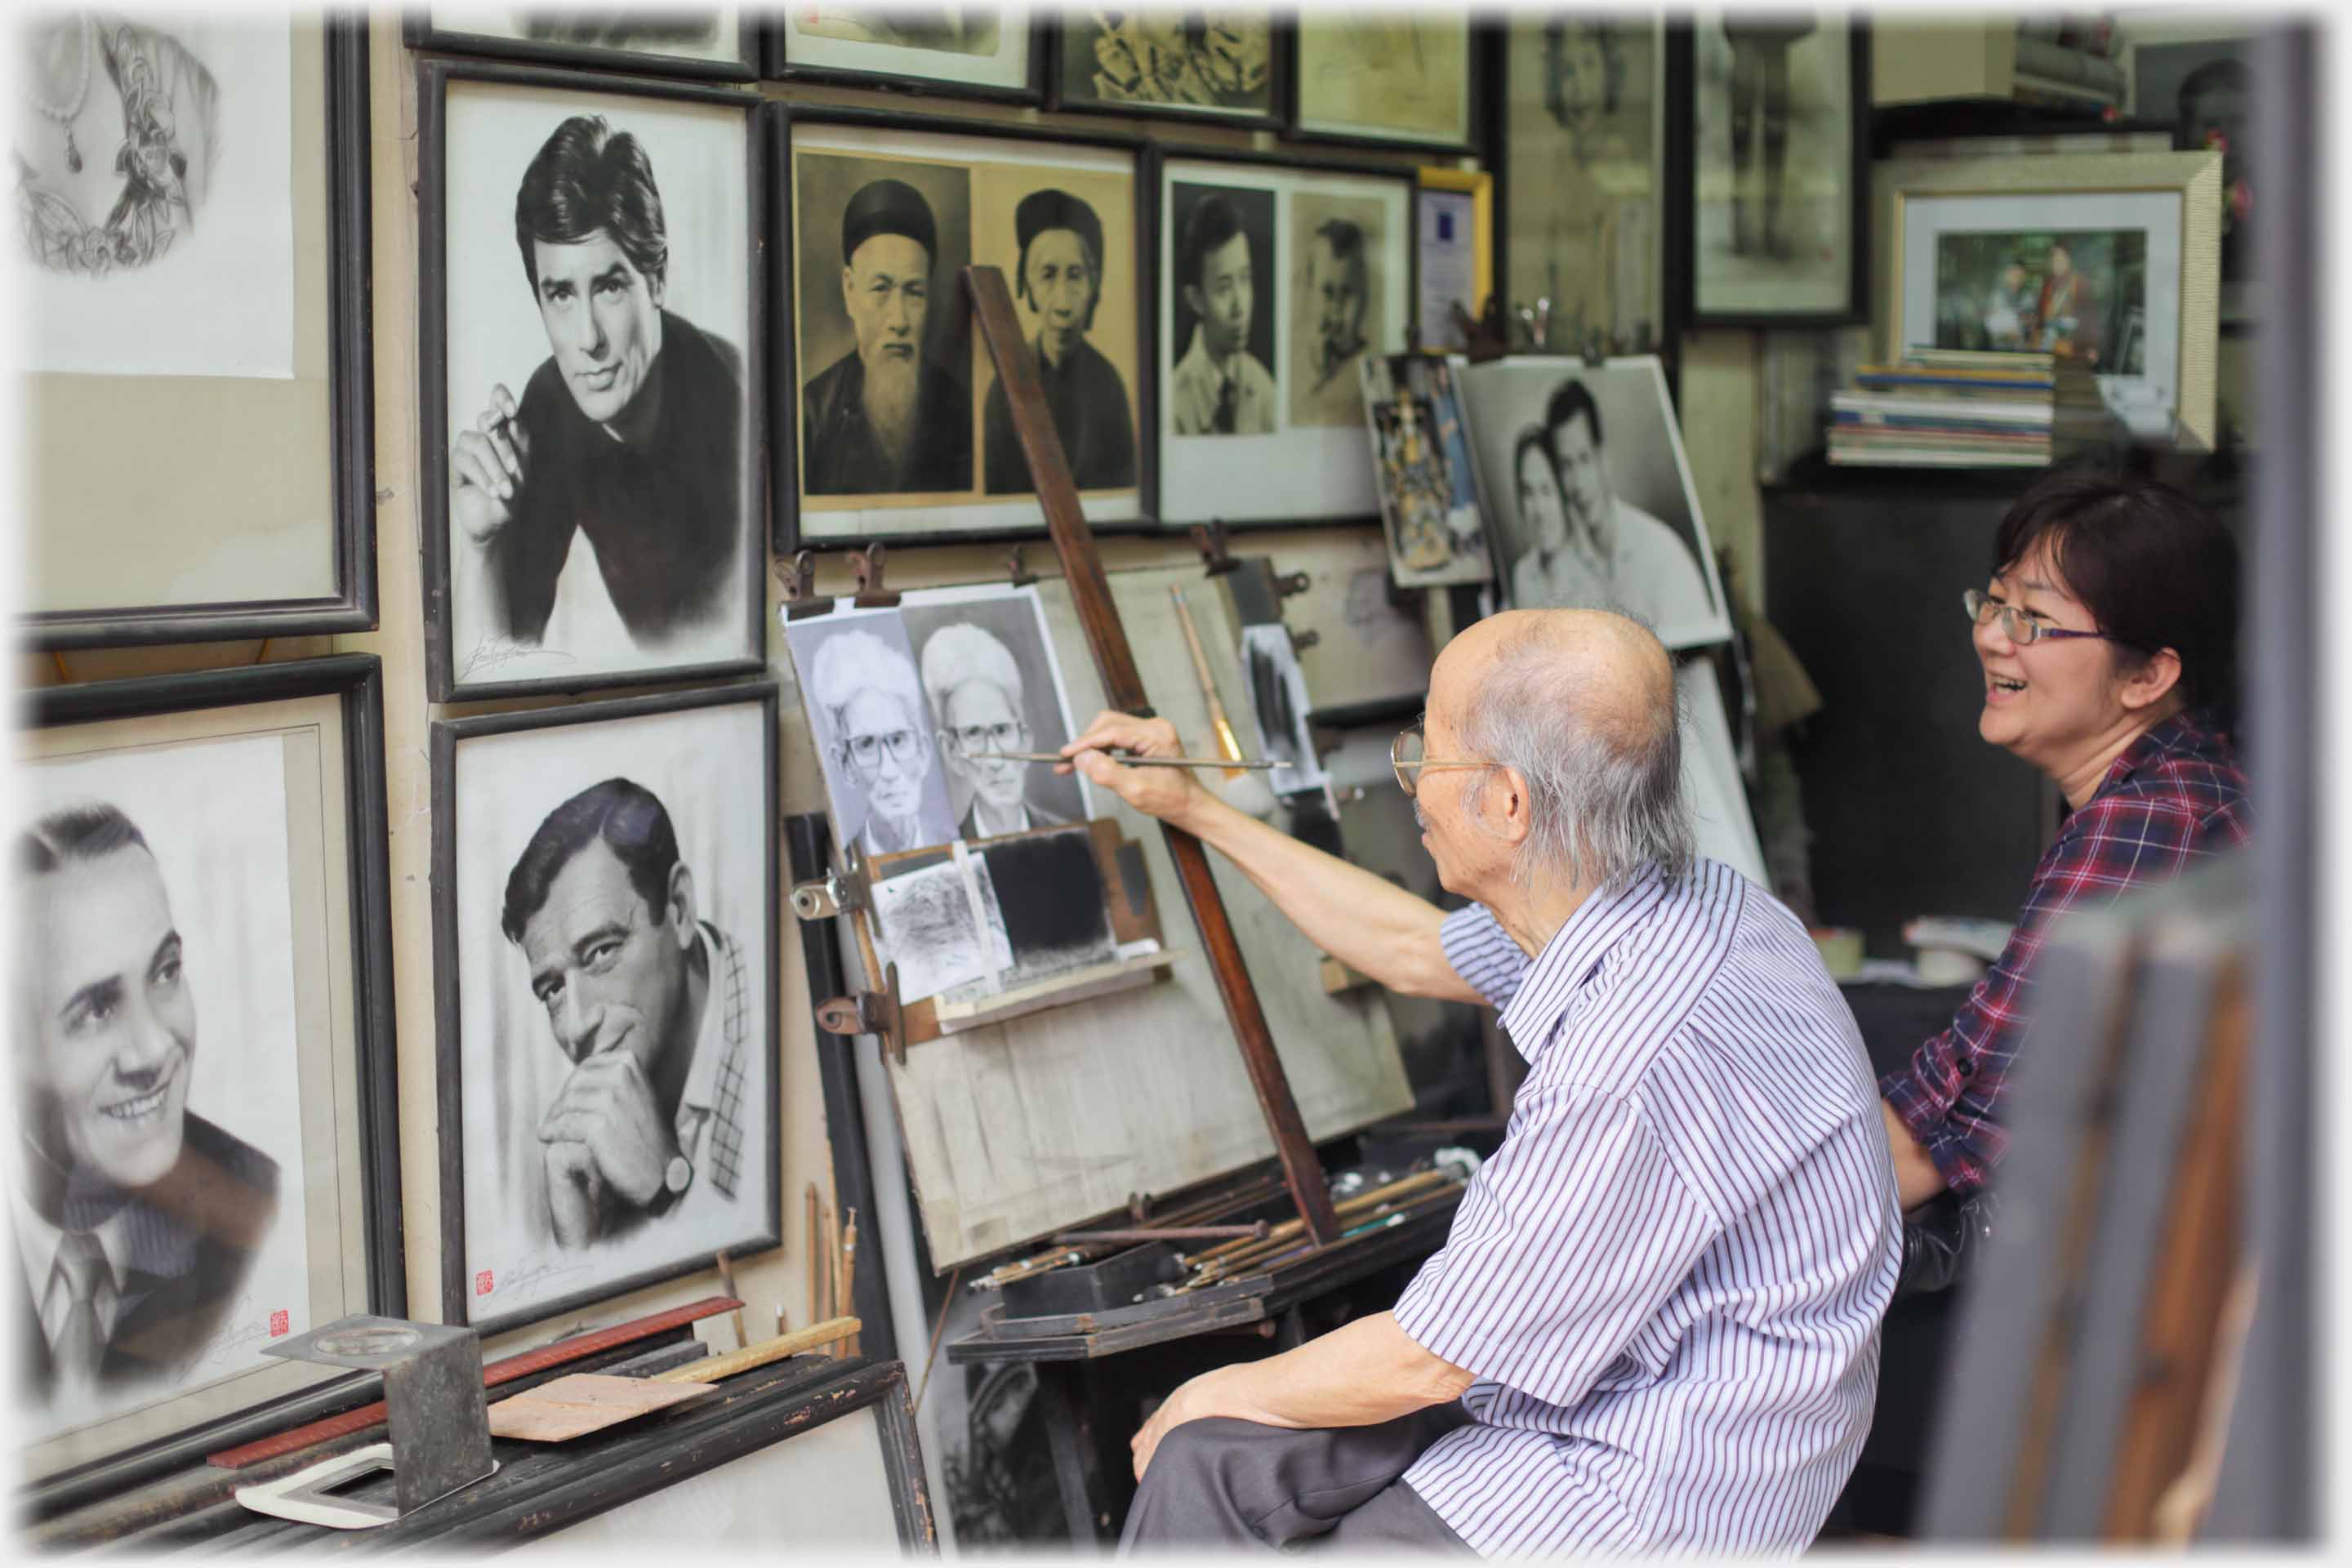 Older man painting small portrait from photograph, wall covered in photographs, woman watching.